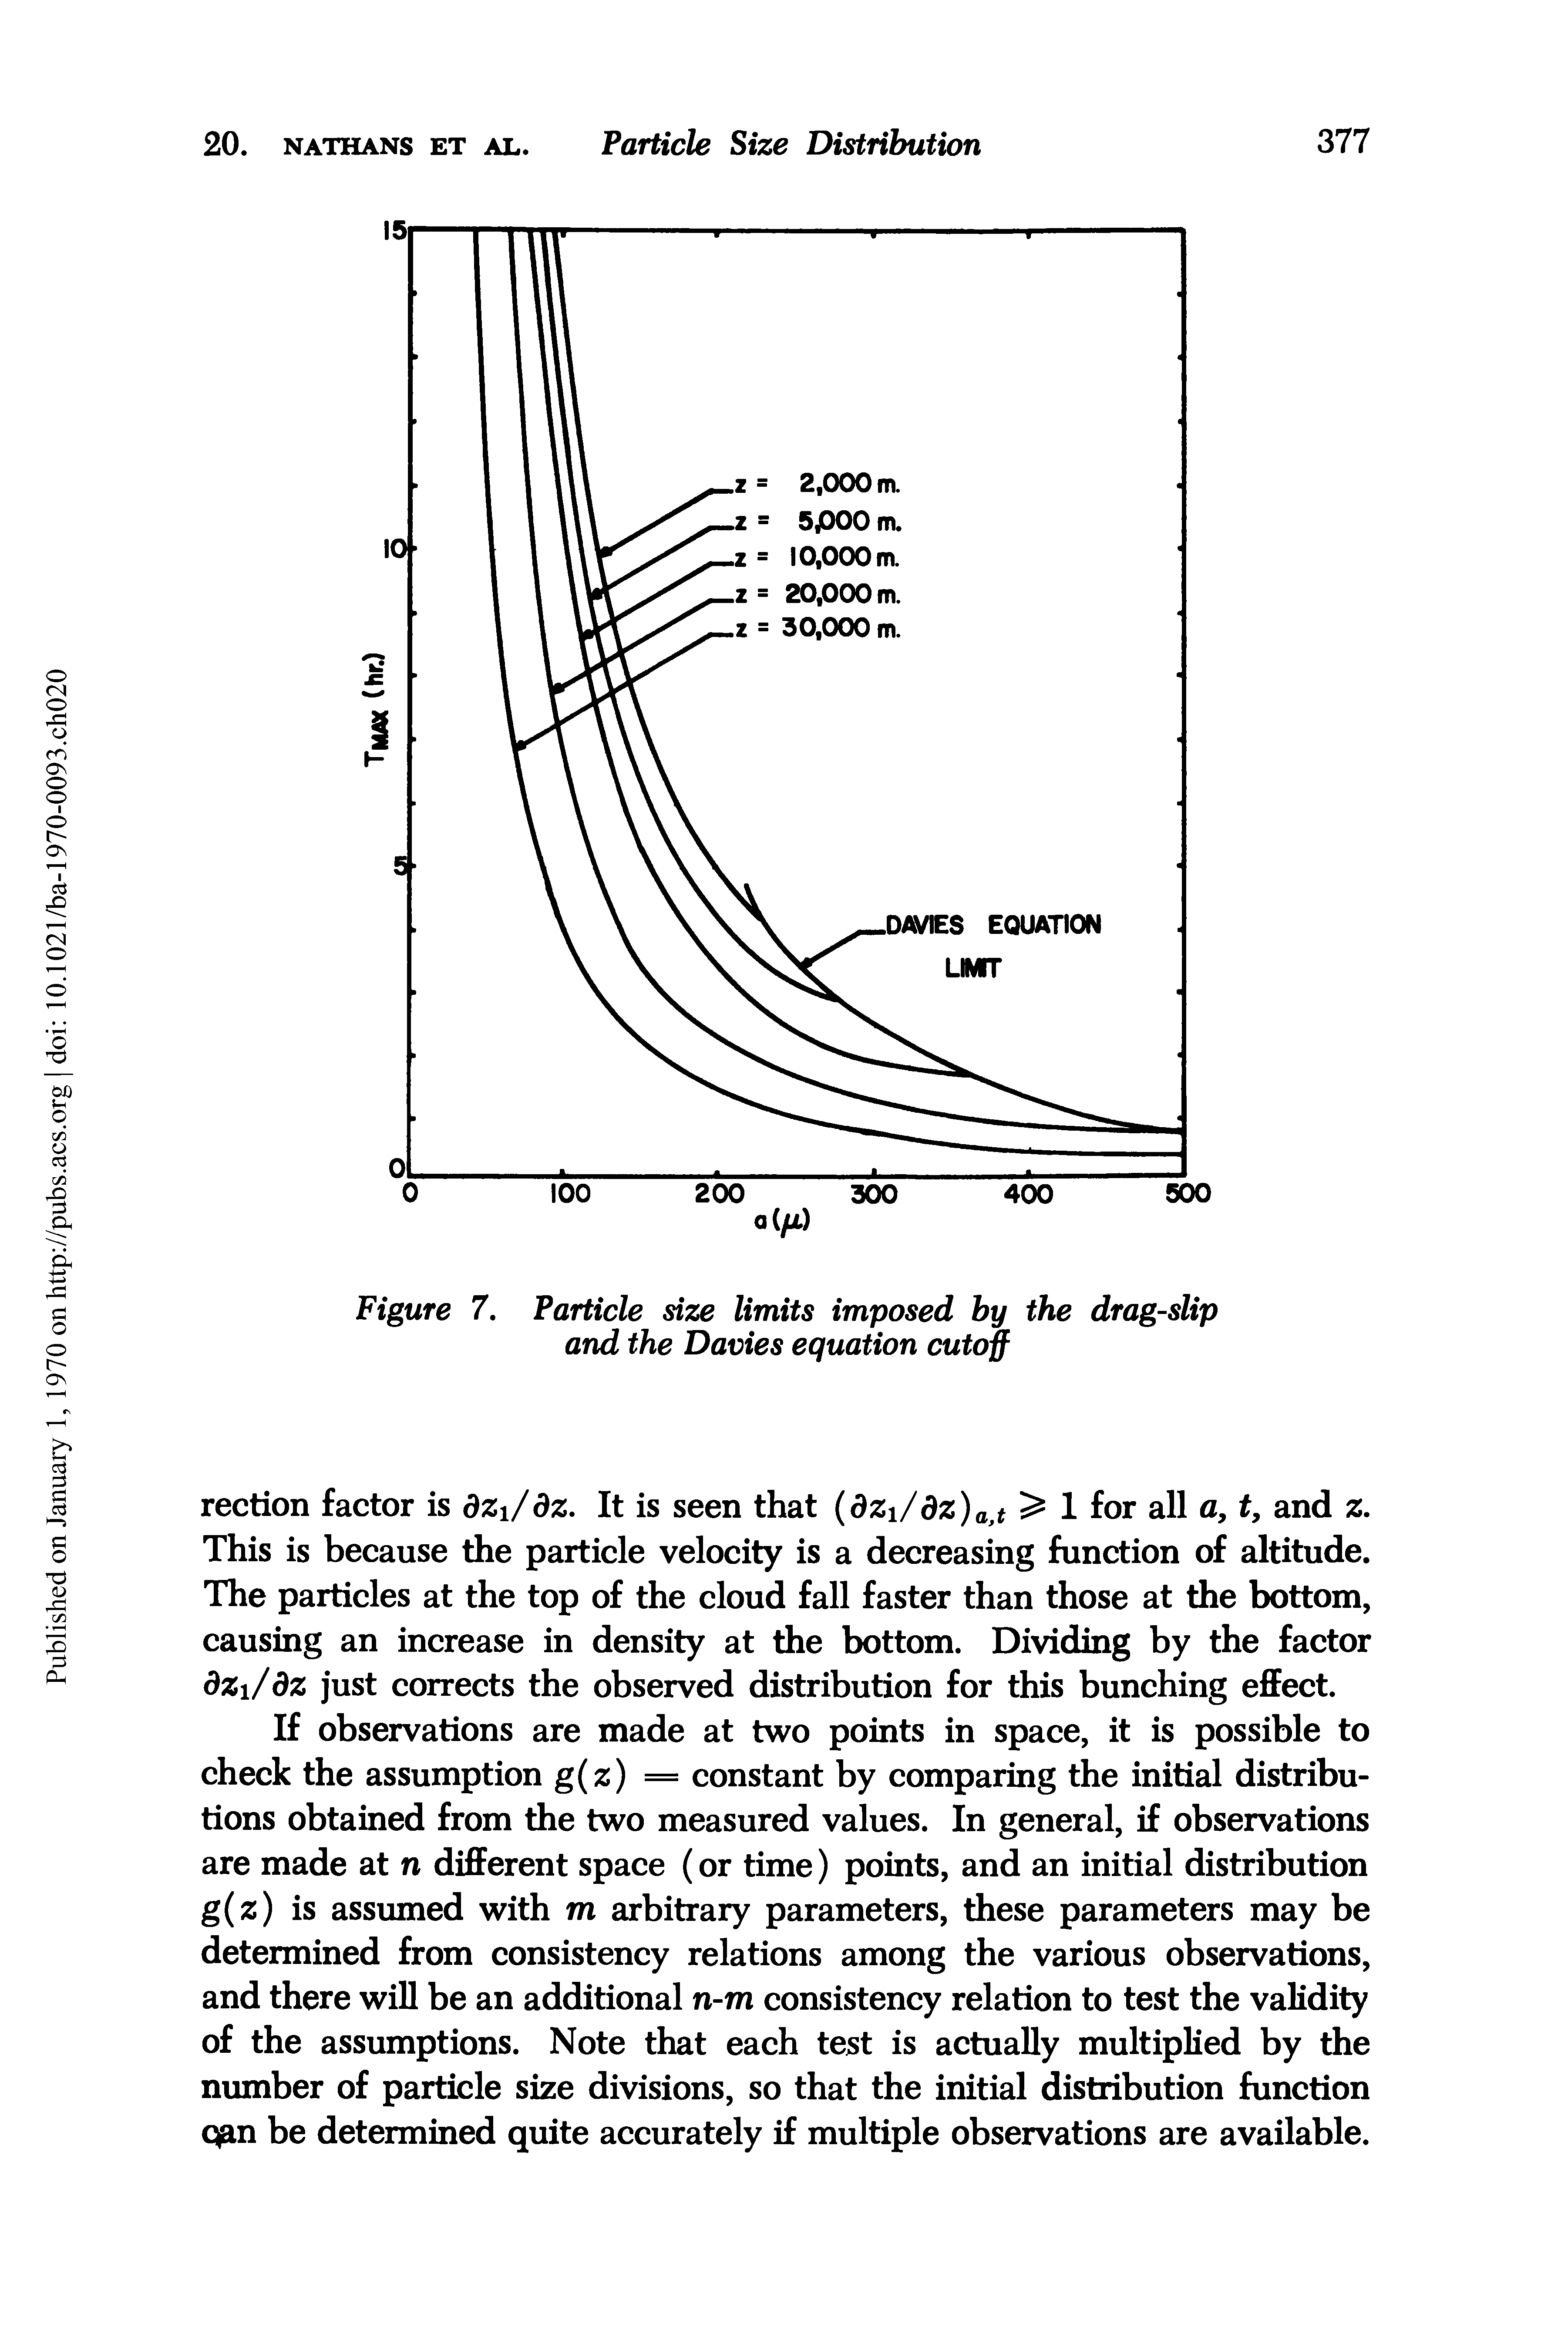 Figure 7. Particle size limits imposed by the drag-slip and the Davies equation cutoff...